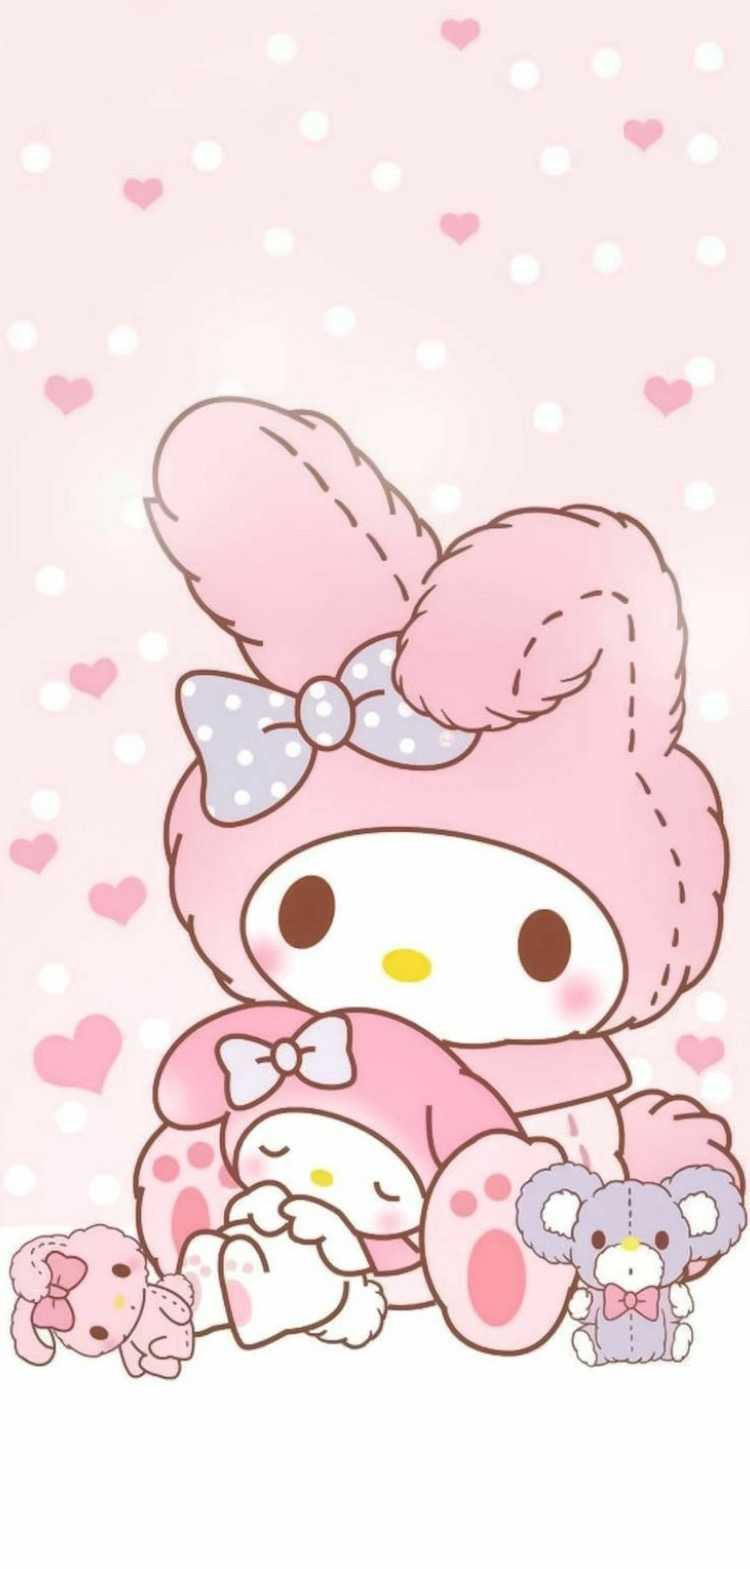 A cute hello kitty with pink bunny ears - Sanrio